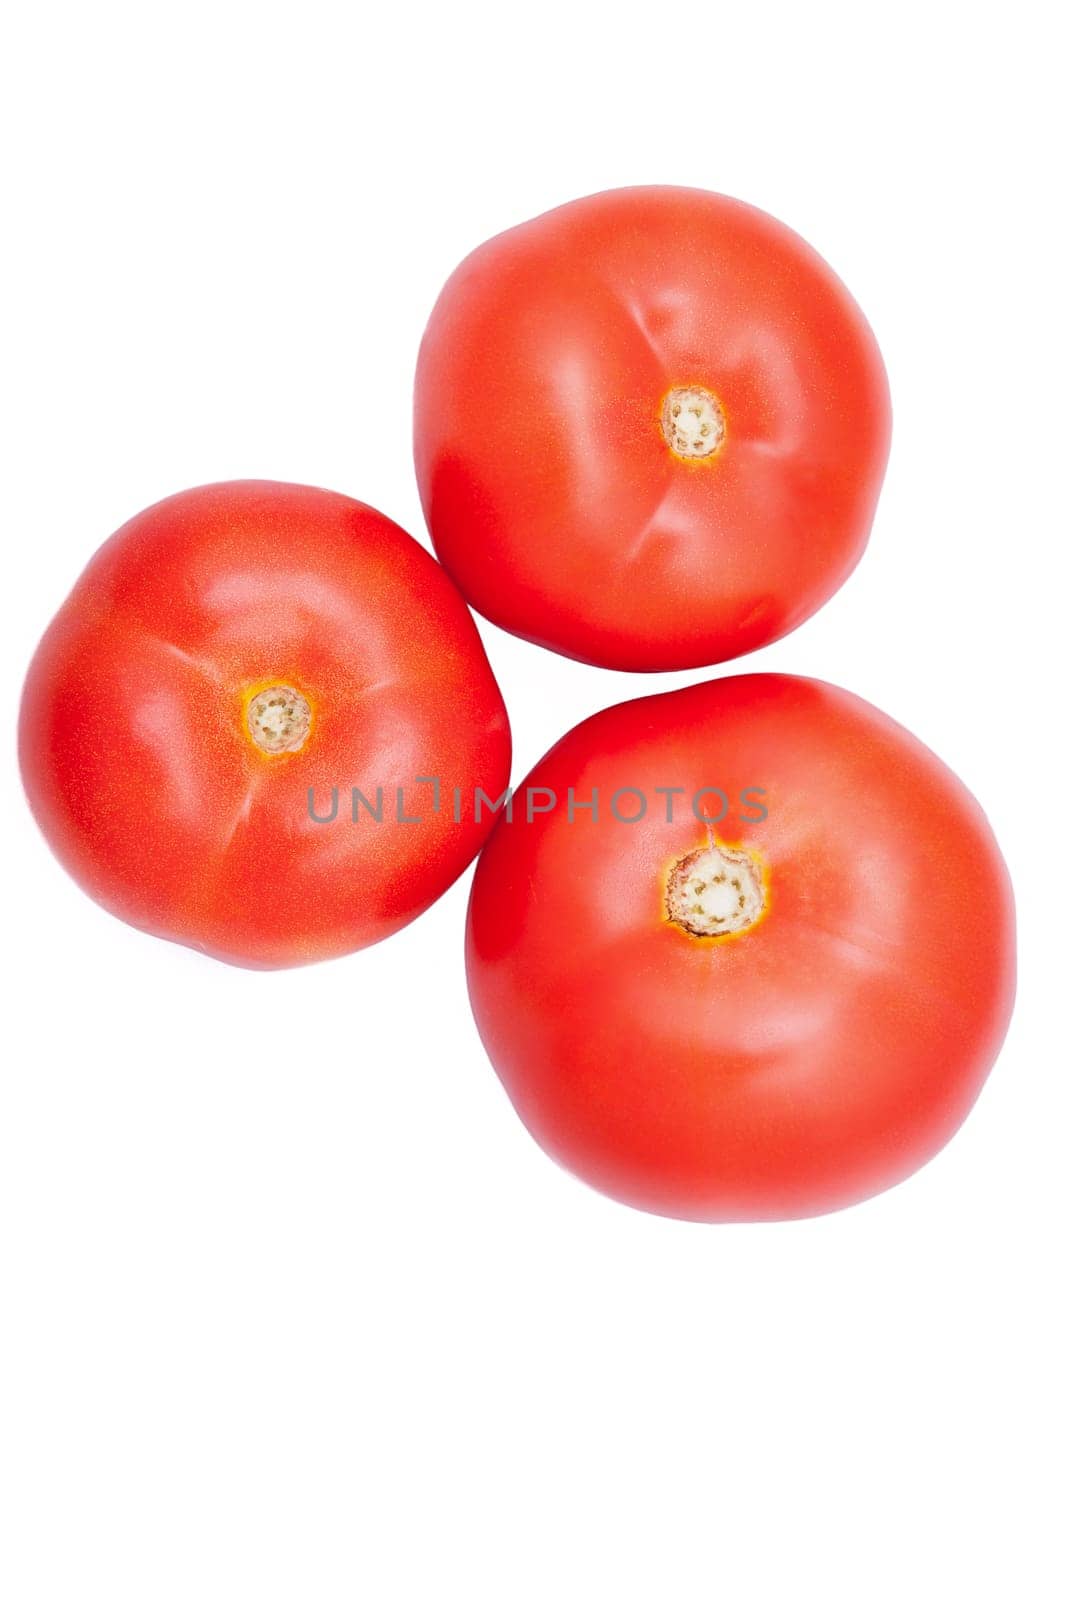 Three fresh healthy tomatoes isolated over white background by DCStudio